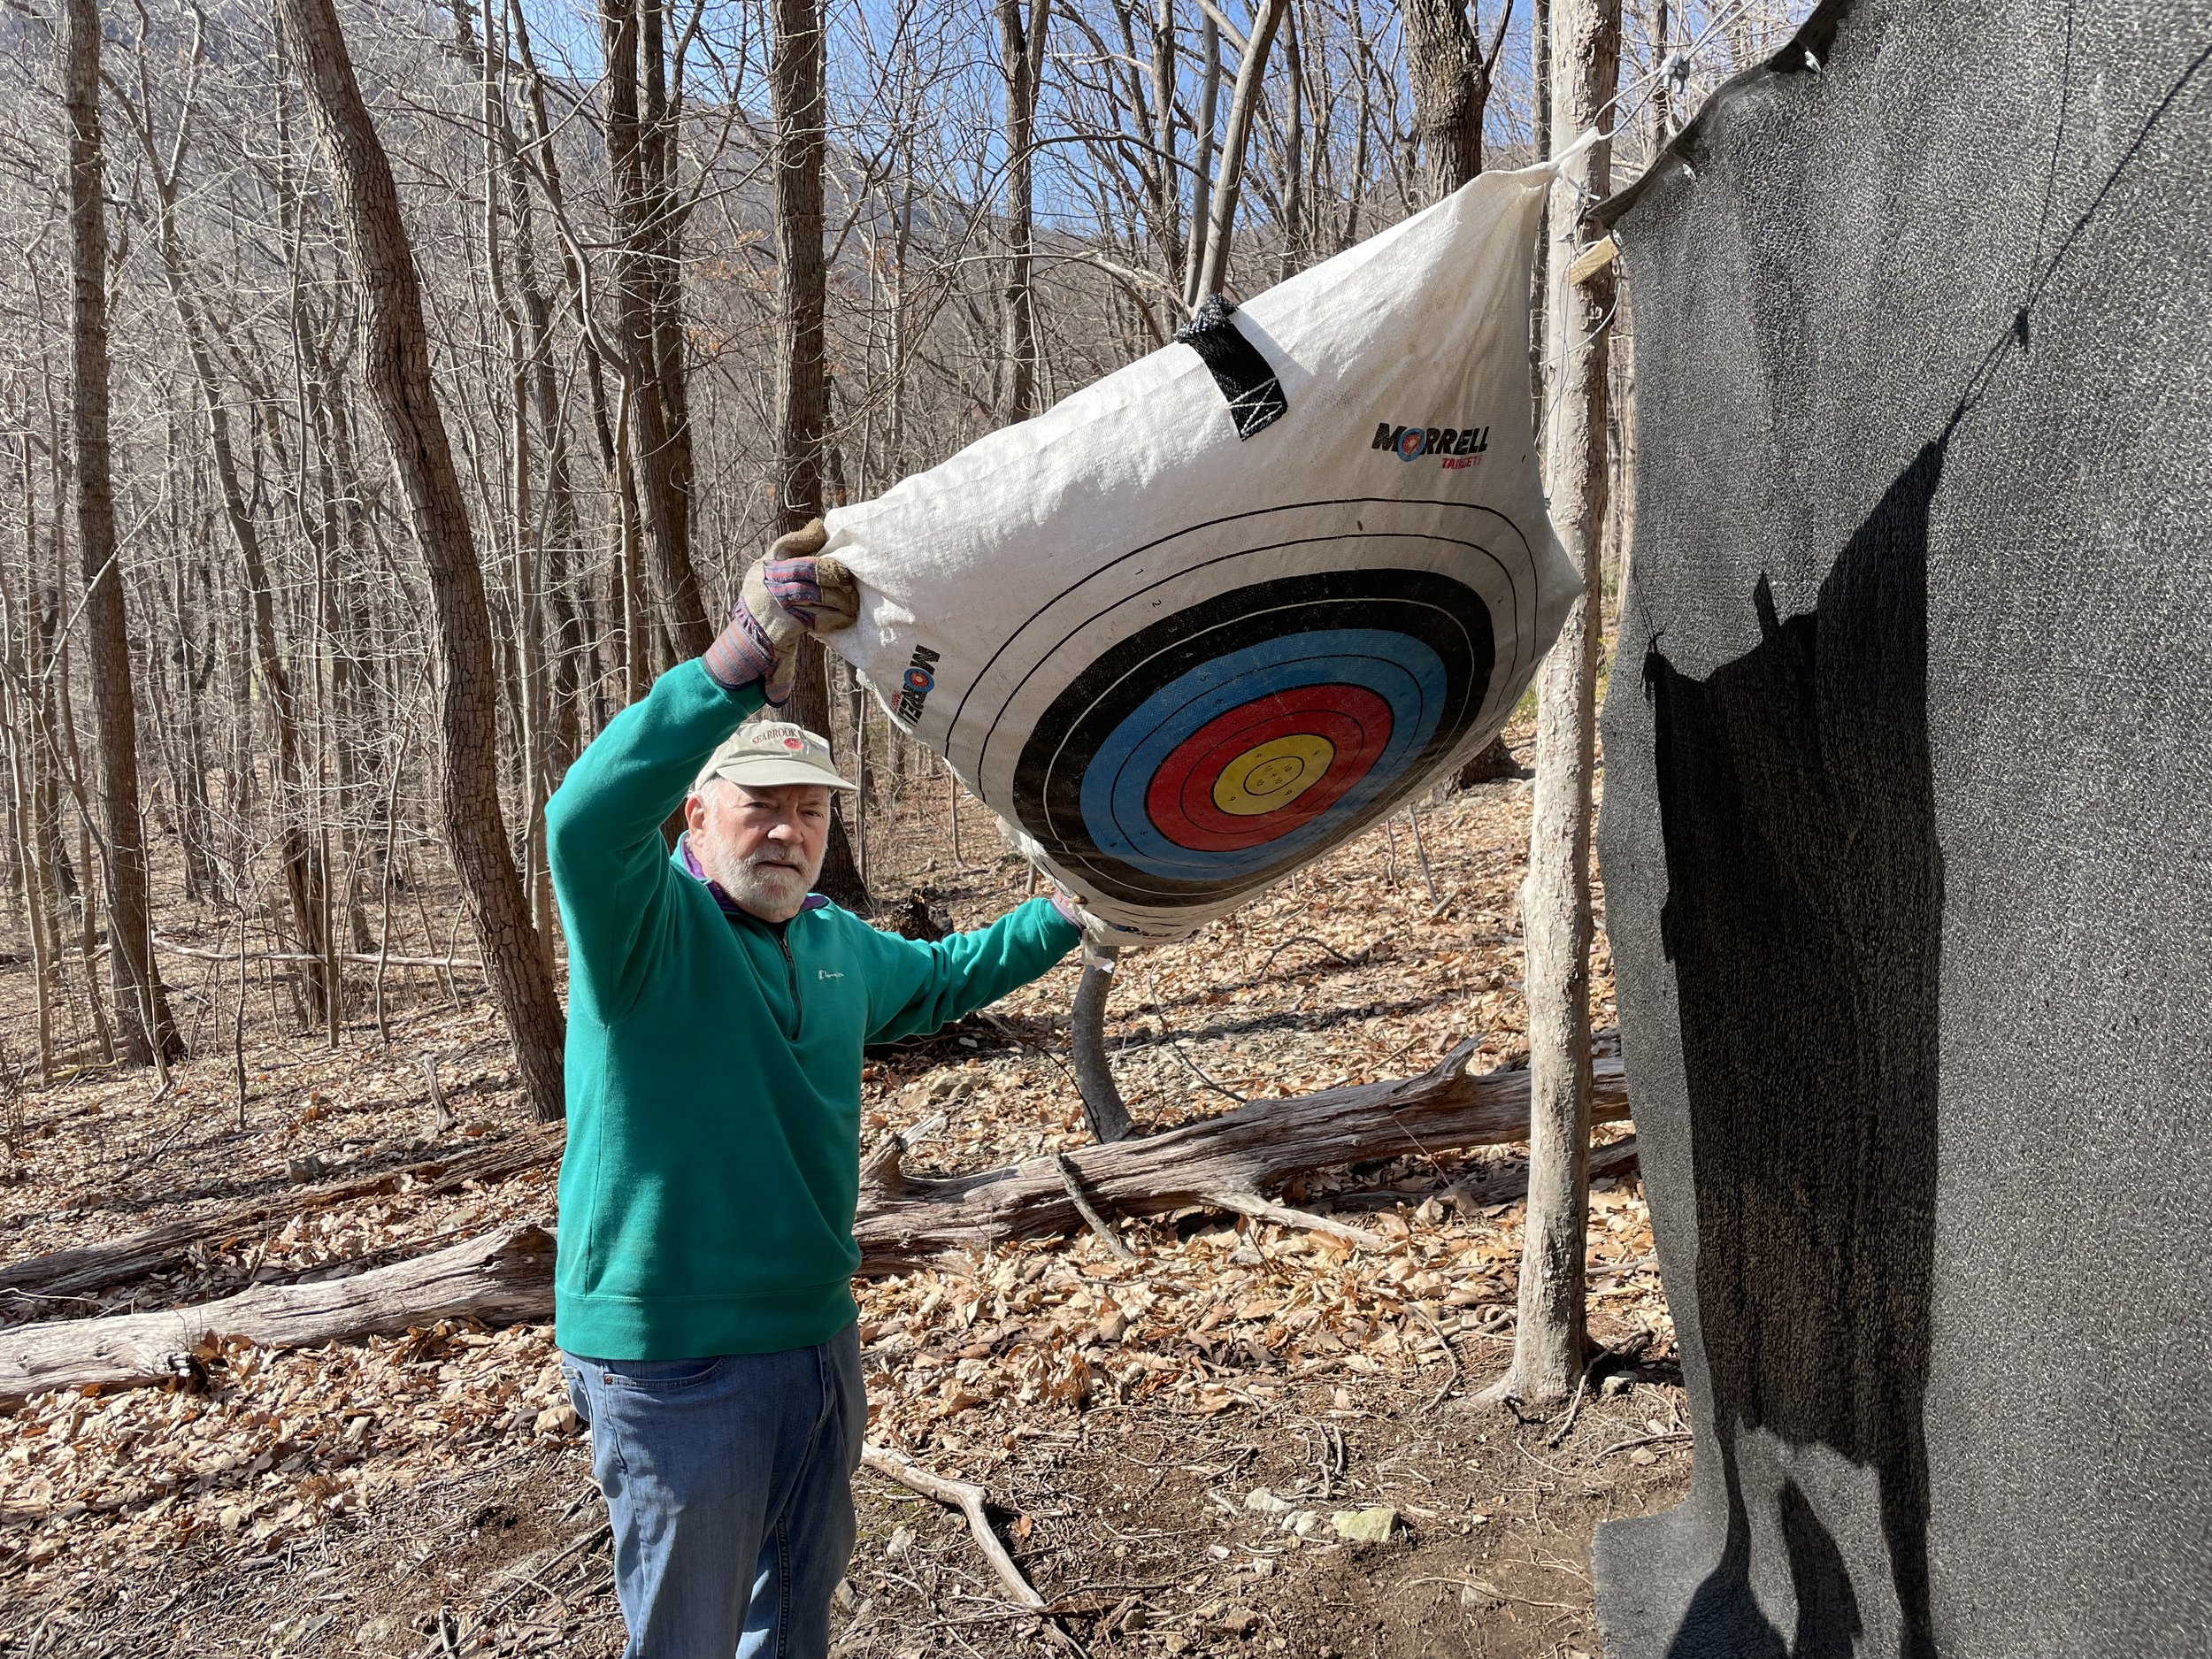   Mike Capps shows how the backside of many of the bag targets still have their color.  